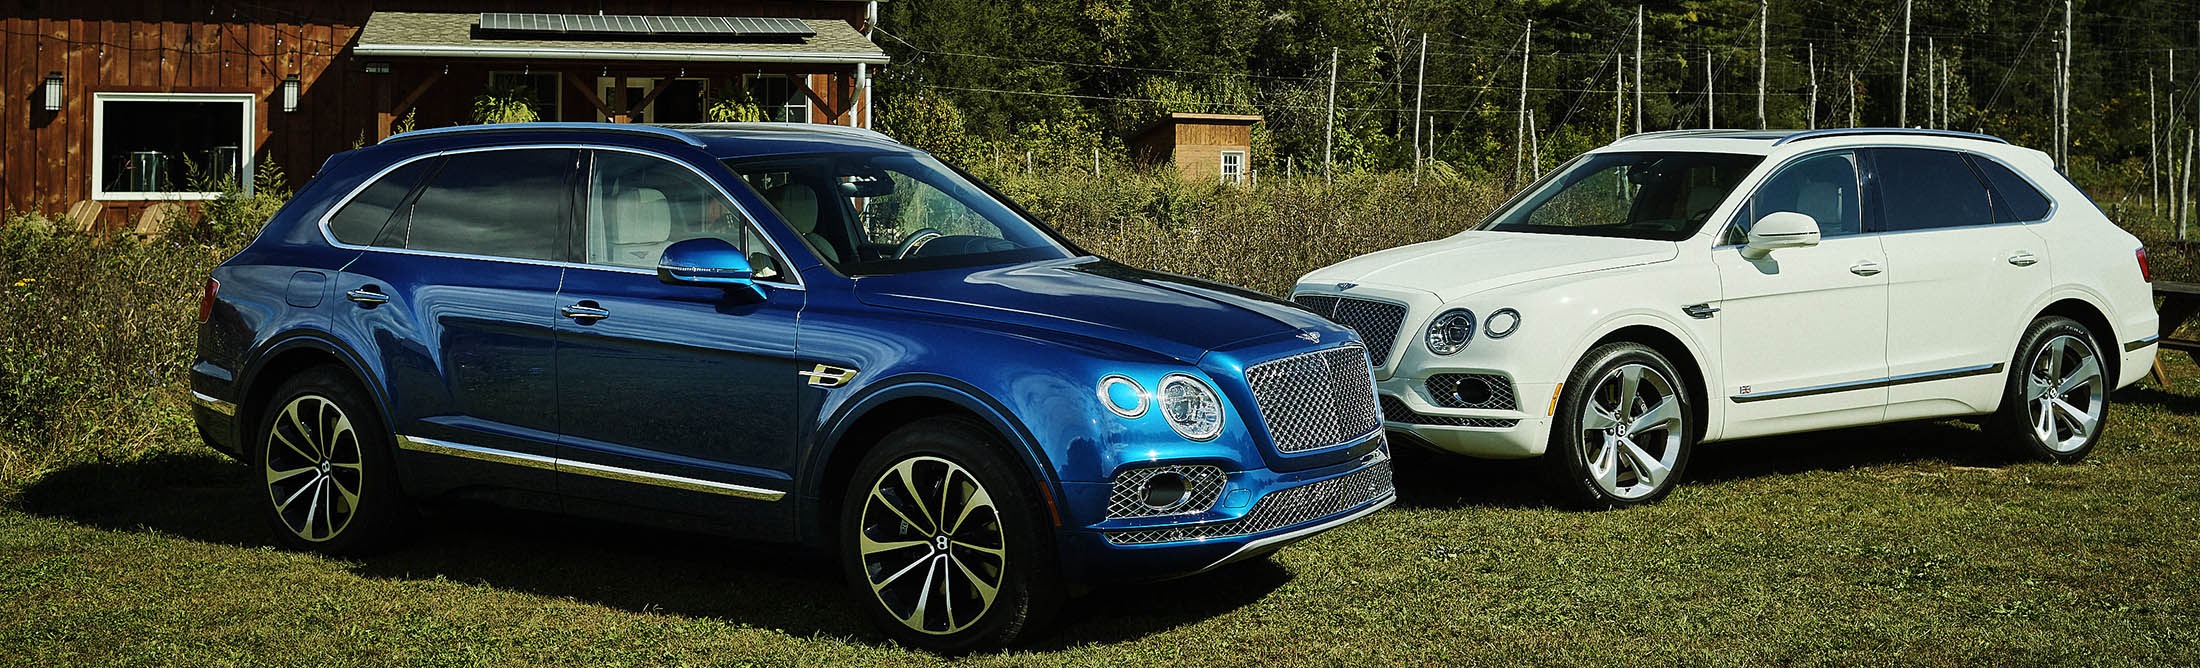 2018 Bentley Bentayga Review Worth The 200 000 Price Tag